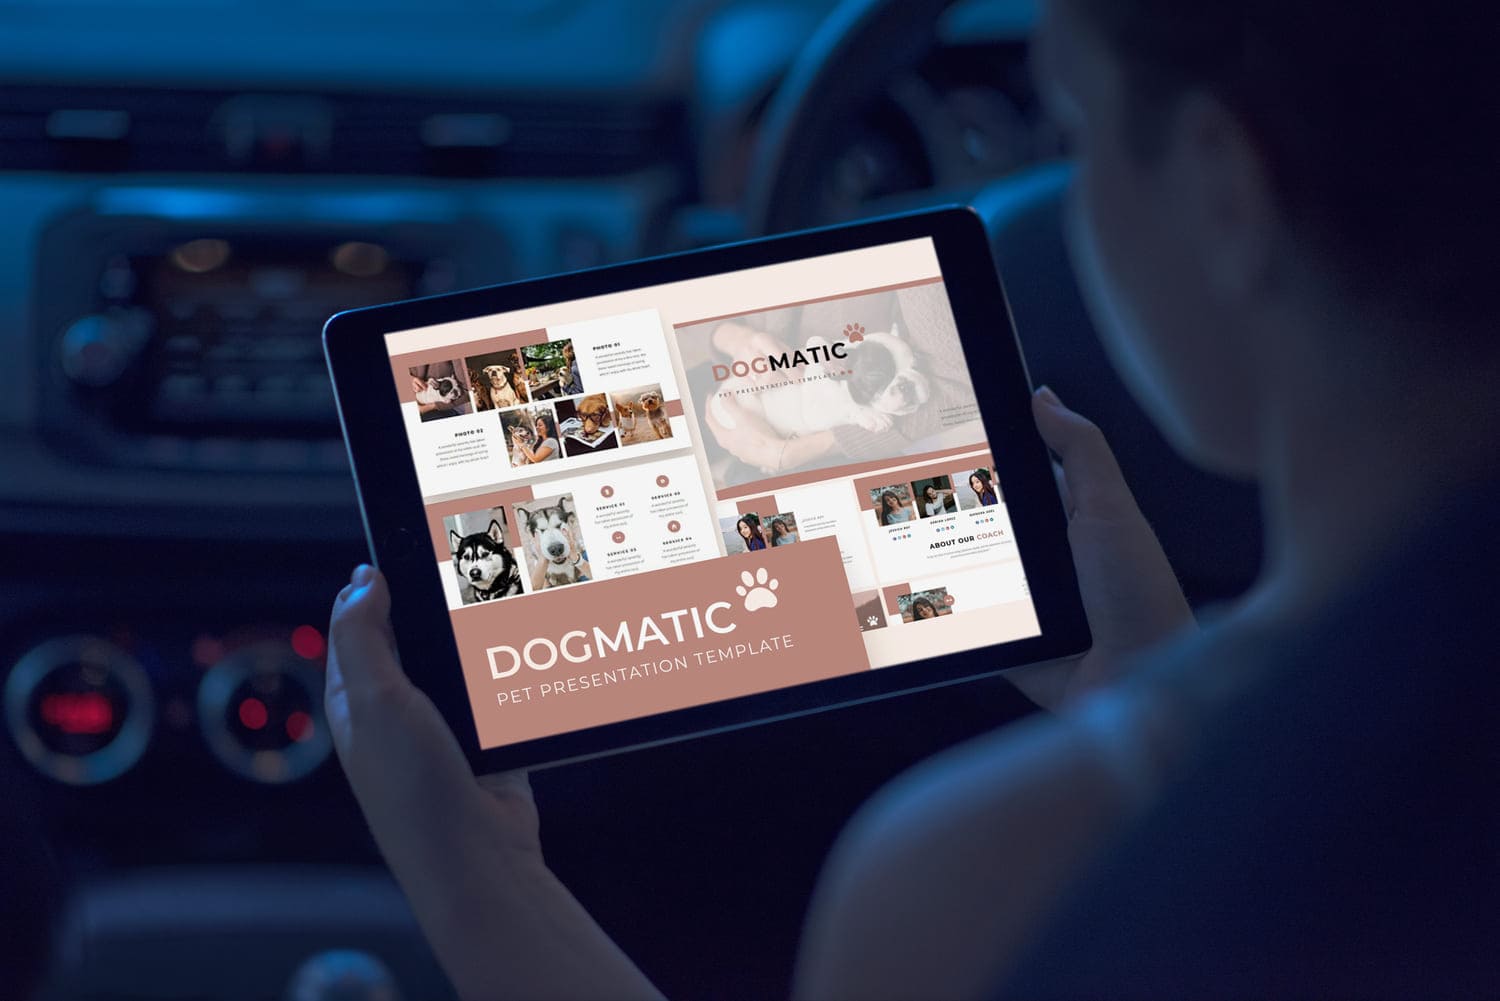 Dogmatic - Pet Presentation Template On The Tablet.